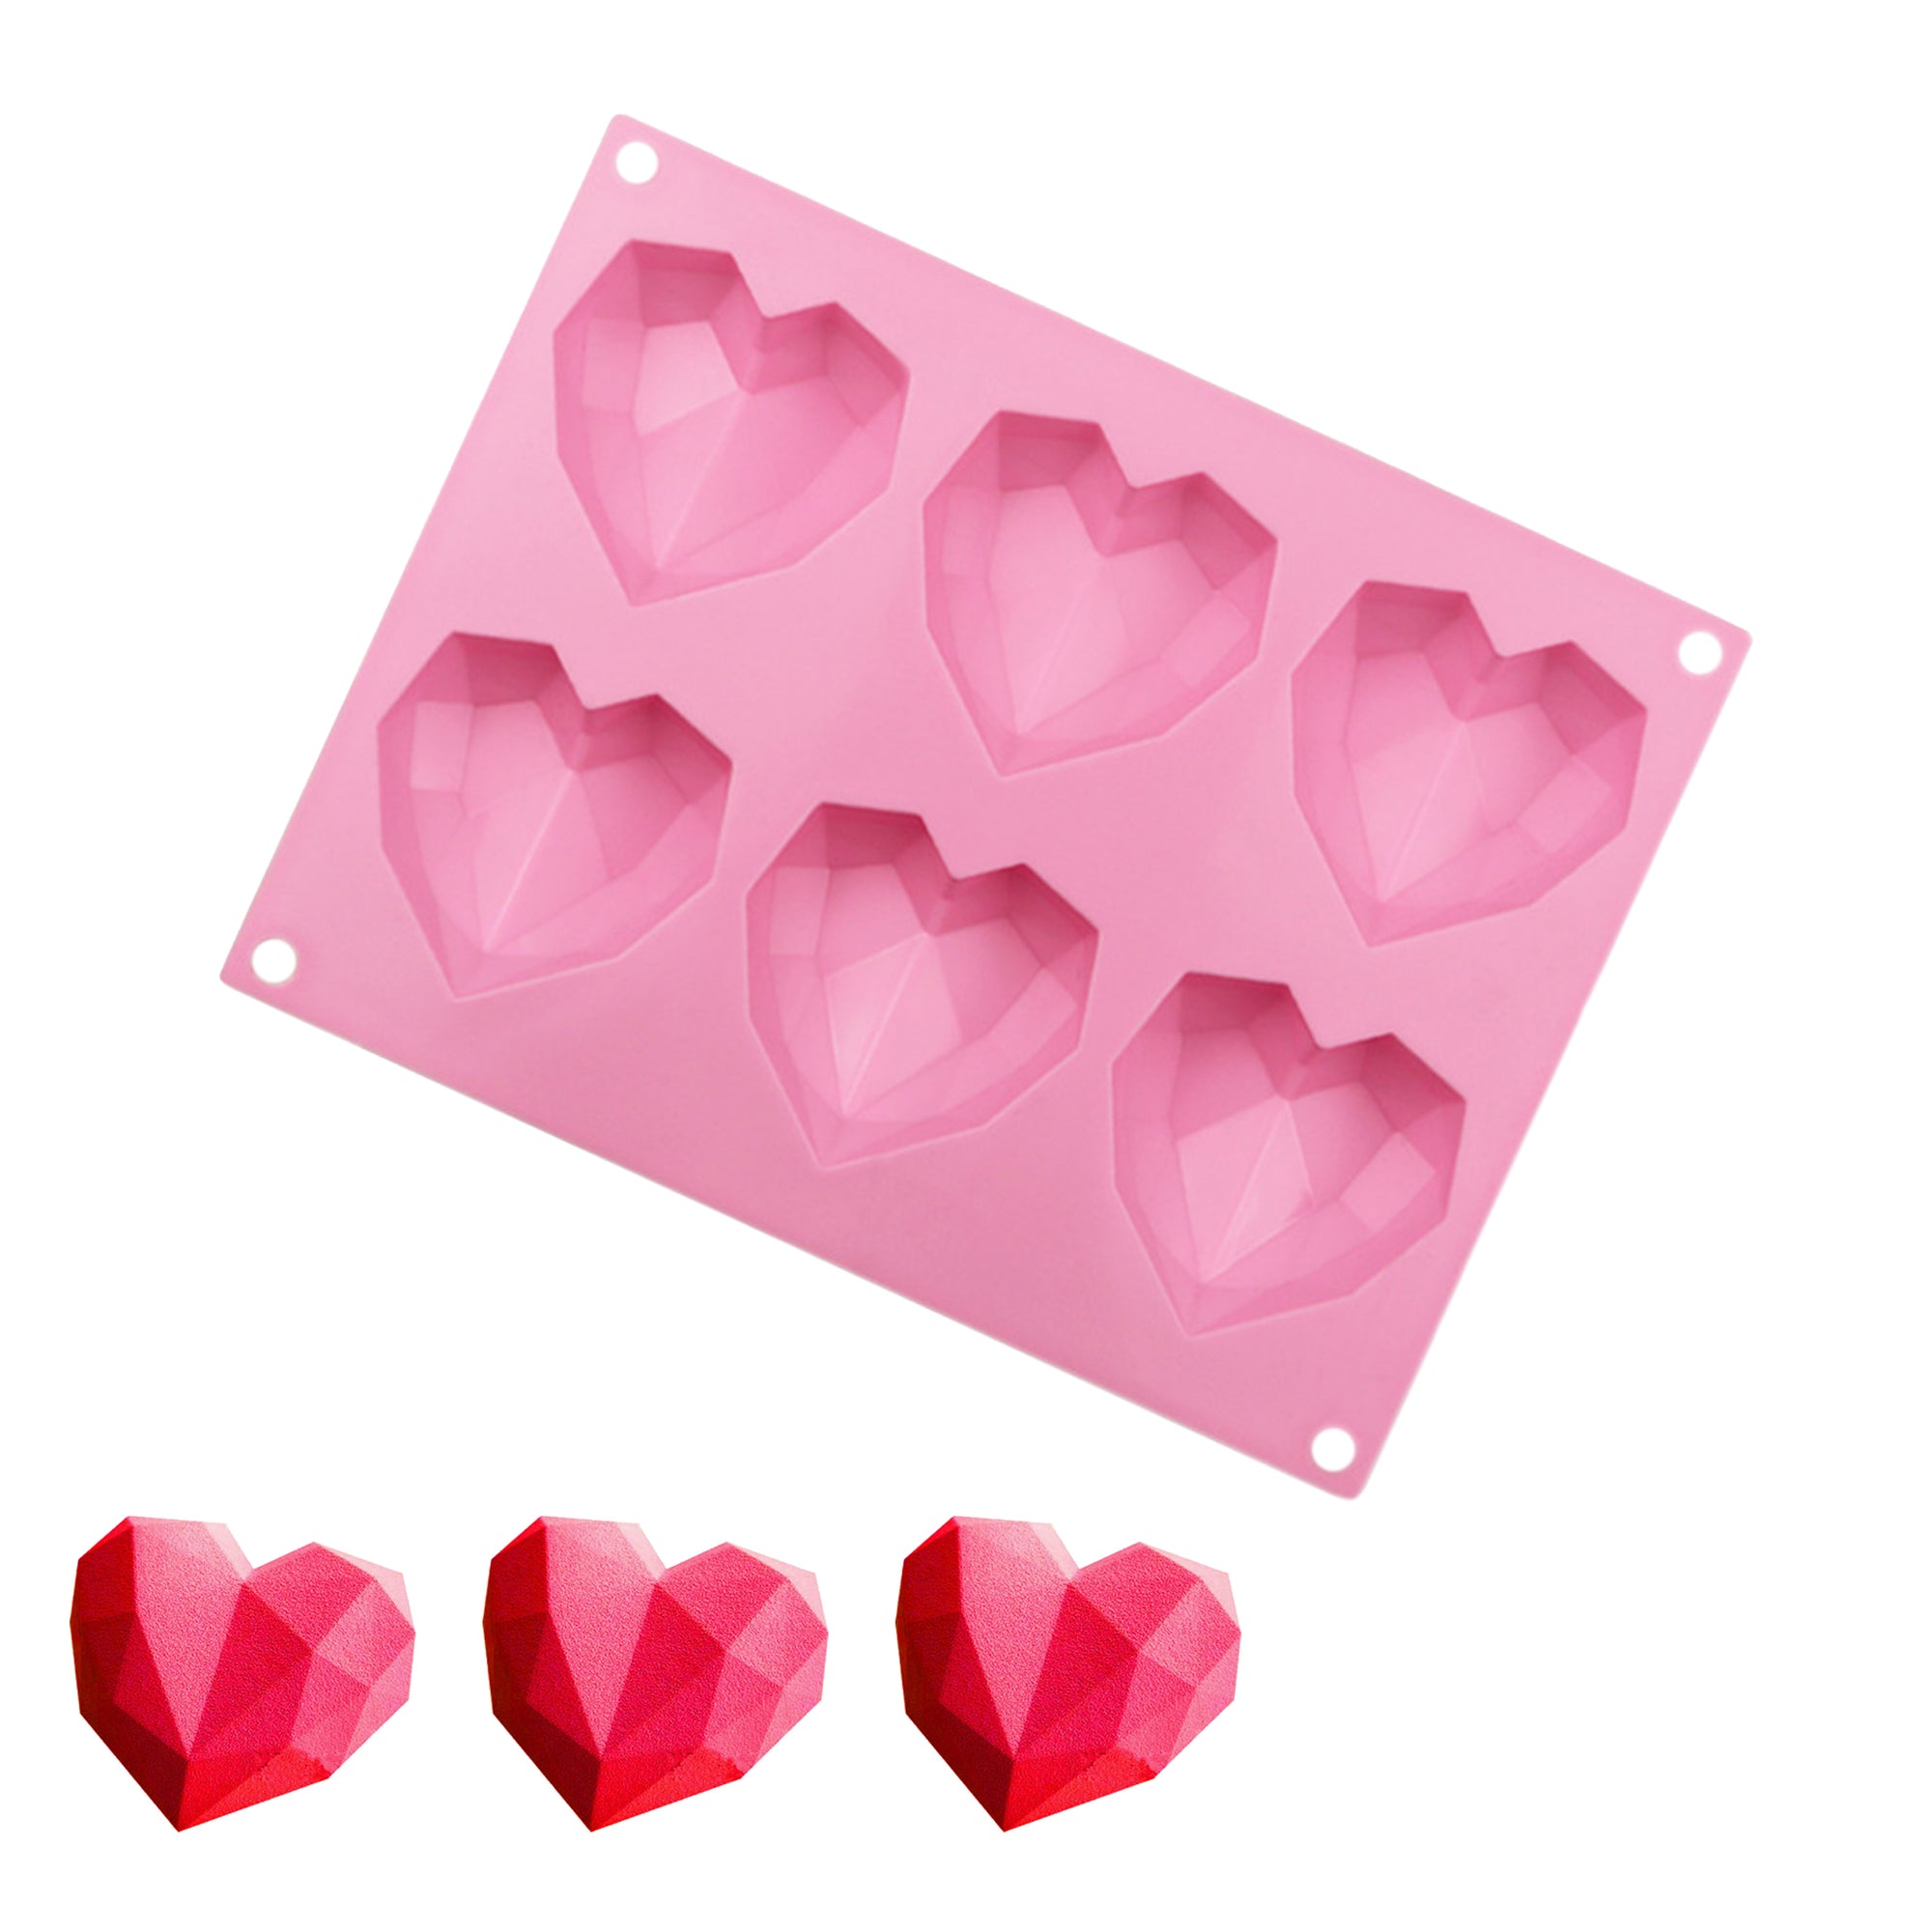 3D Geometric Heart Mold for Hot Cocoa Bombs